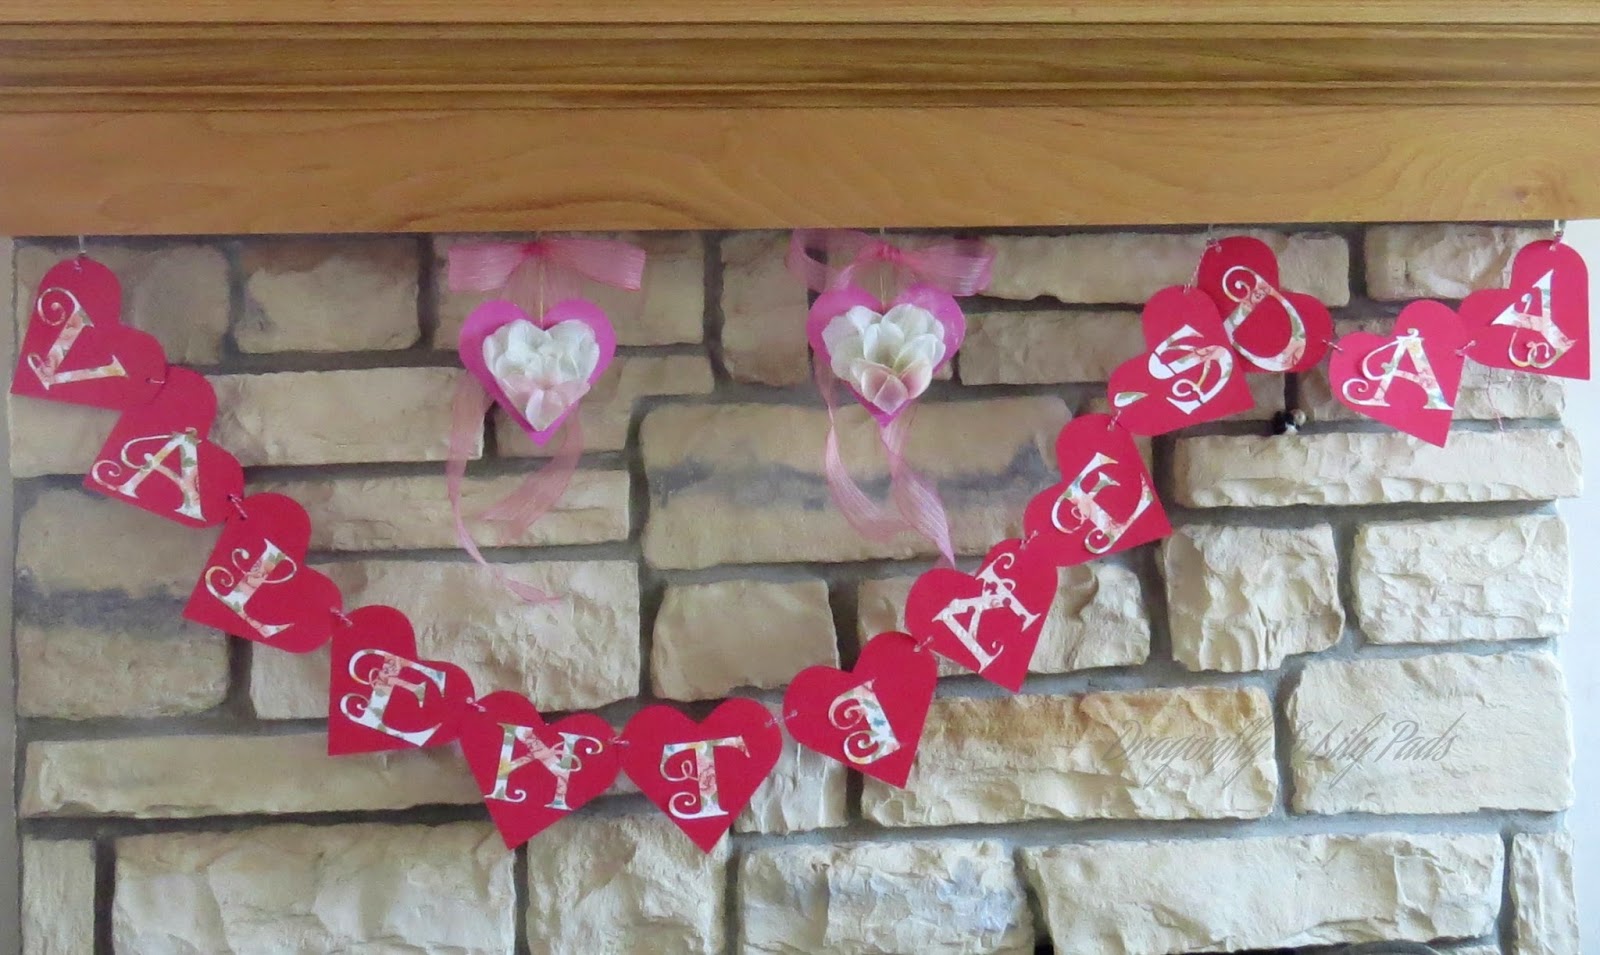 Decoupaged Hearts Decor, Valentine's Day Banner, Fireplace, Hearts, Decor